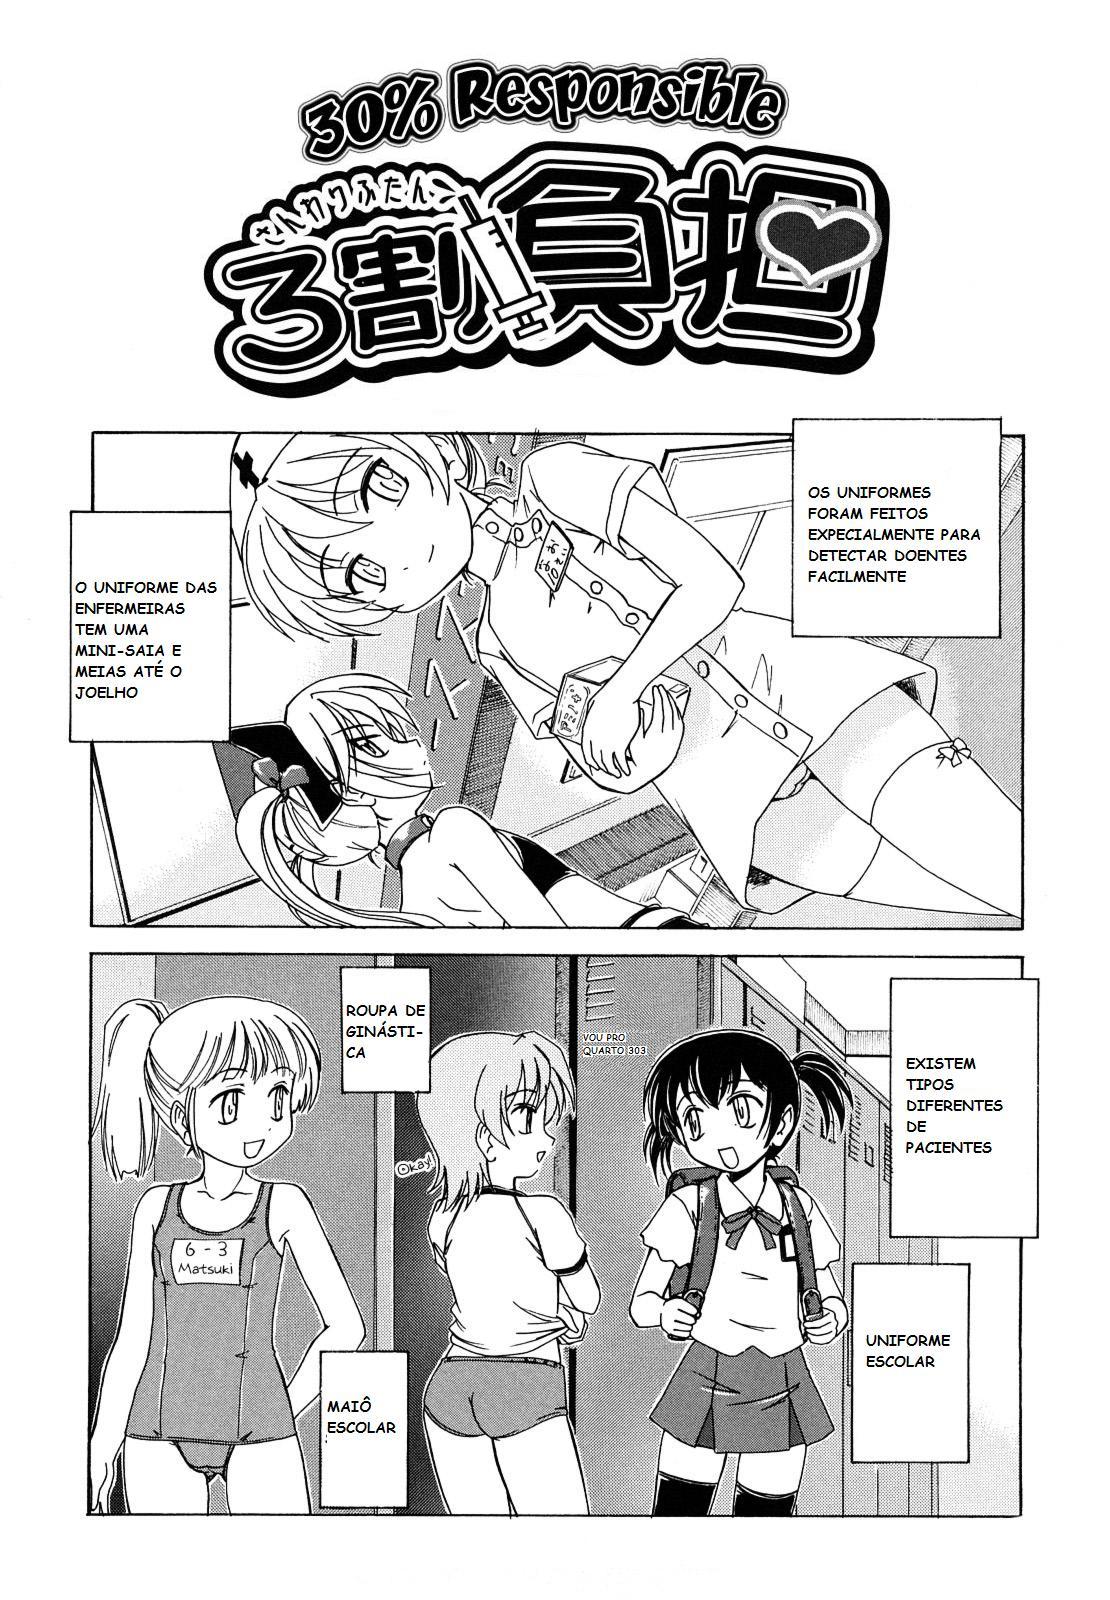 Hentaihome – Lolicons no hospital (2)